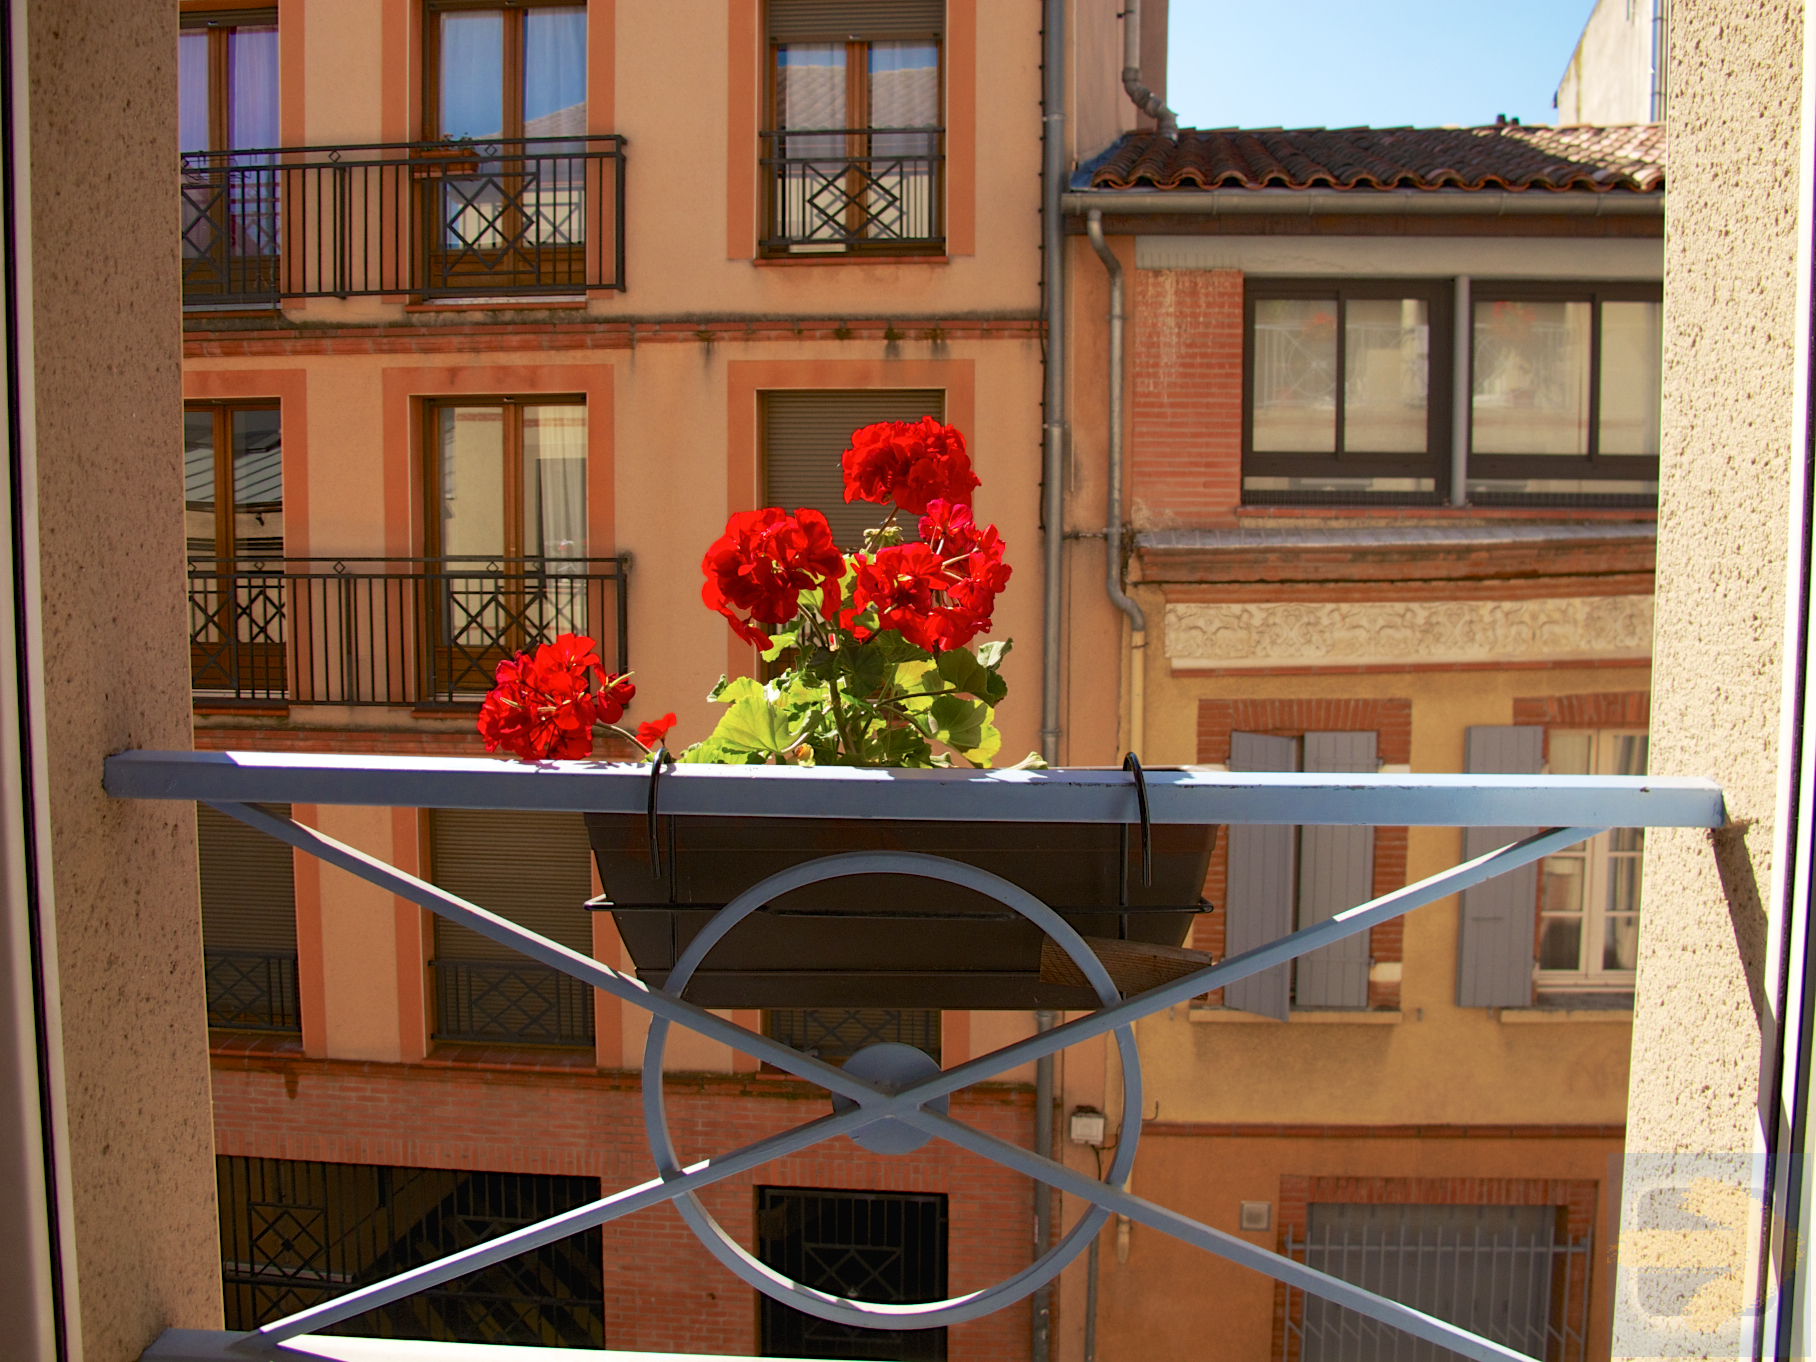 View from our Albergue window in Toulouse.